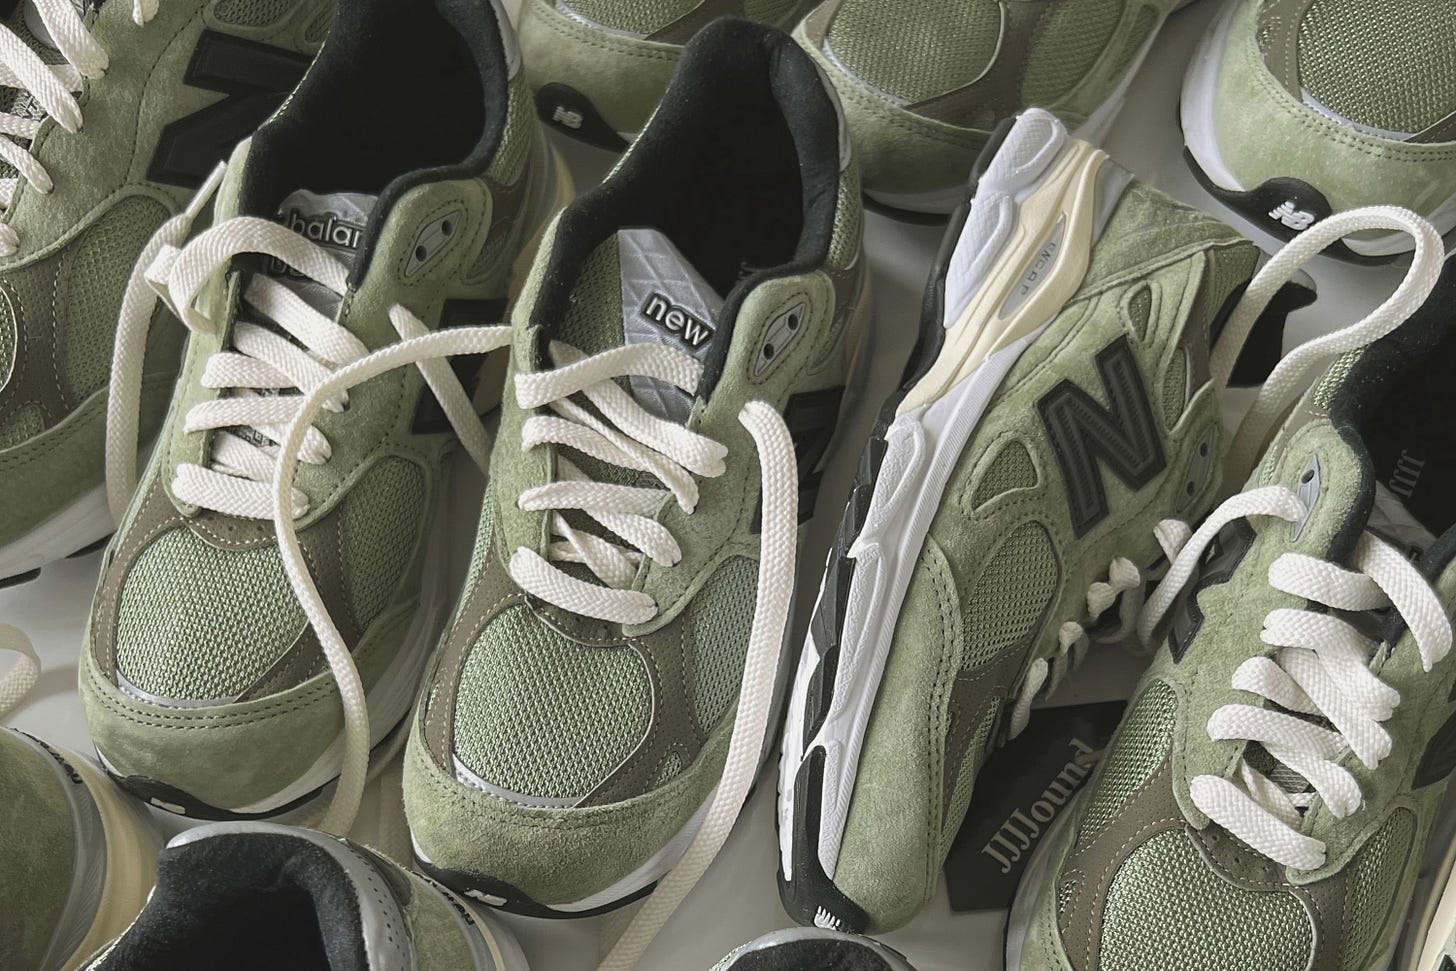 JJJJound x New Balance 990v3 'Olive' Release Date, Price, and Where to Buy